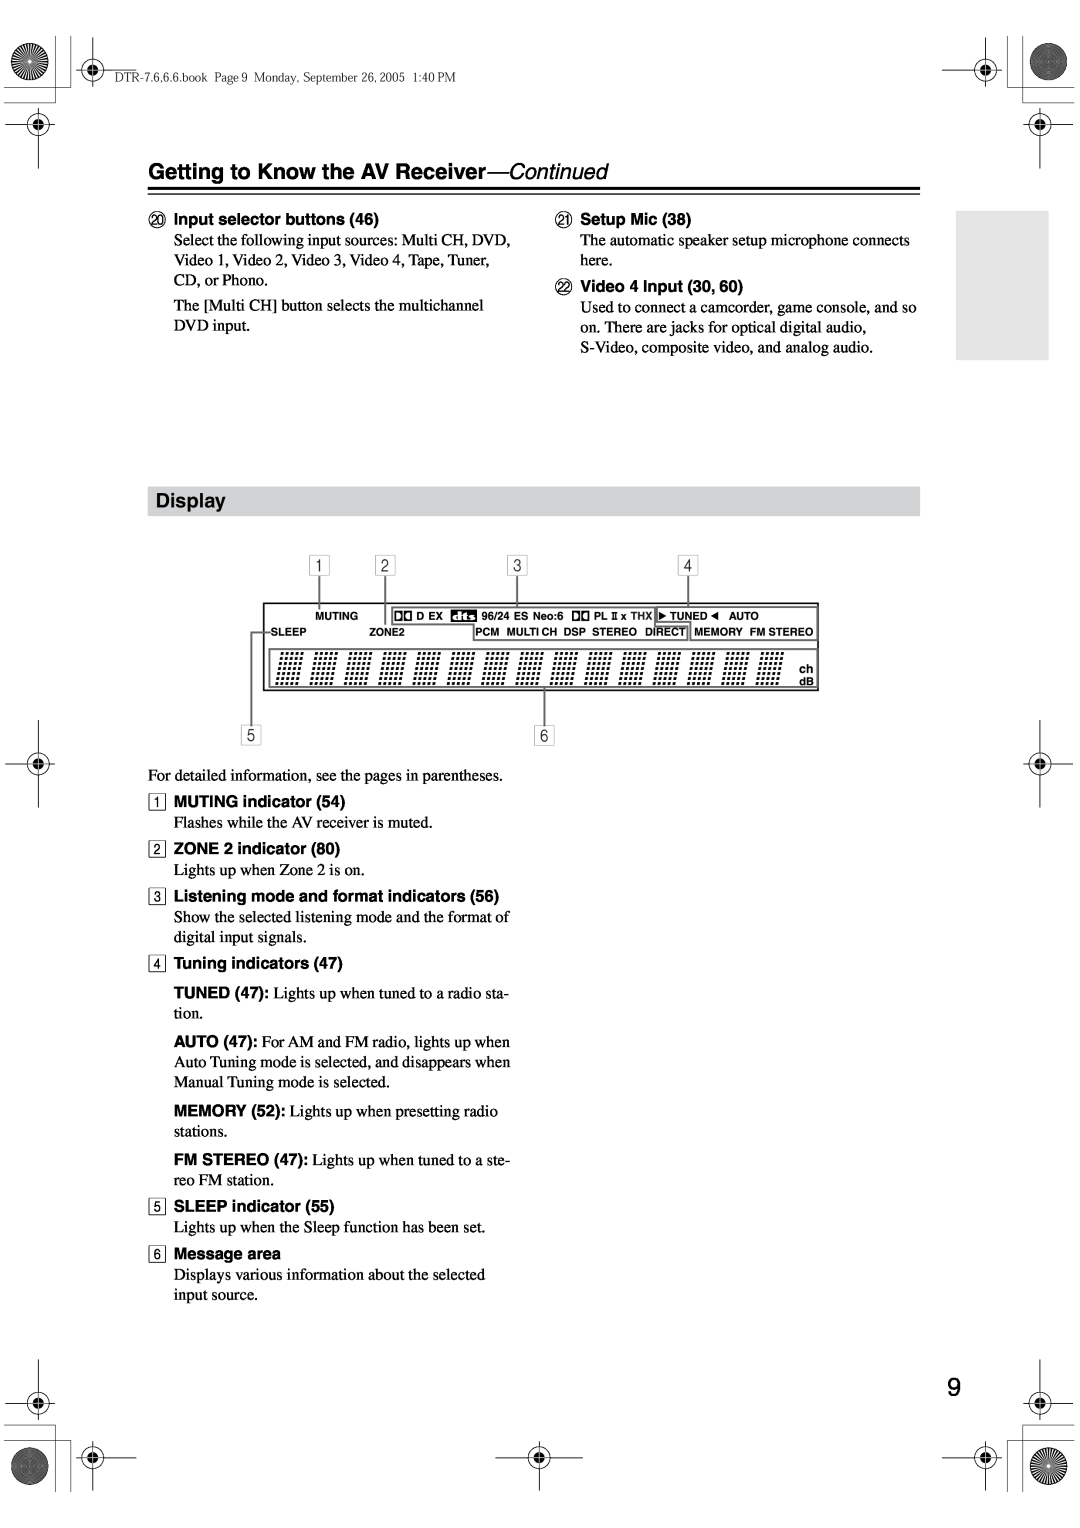 Integra DTR-7.6/6.6 instruction manual Getting to Know the AV Receiver—Continued, Display 